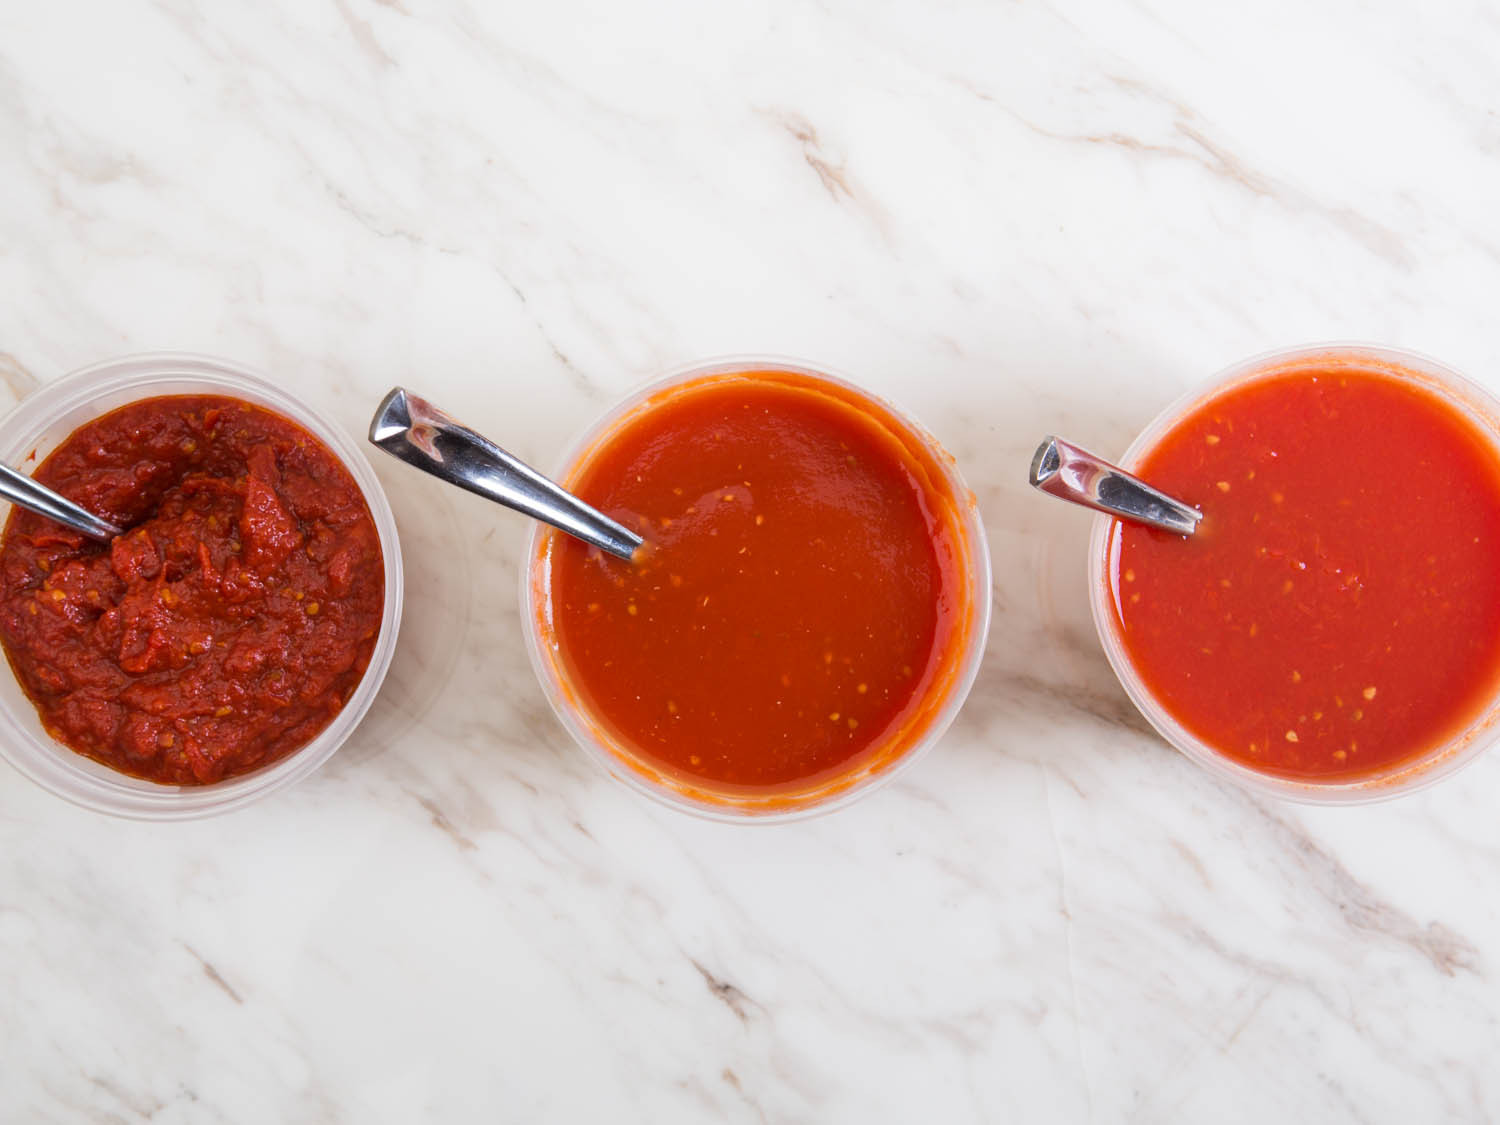 Make Tomato Sauce From Tomato Paste
 How to Make the Best Tomato Sauce From Fresh Tomatoes